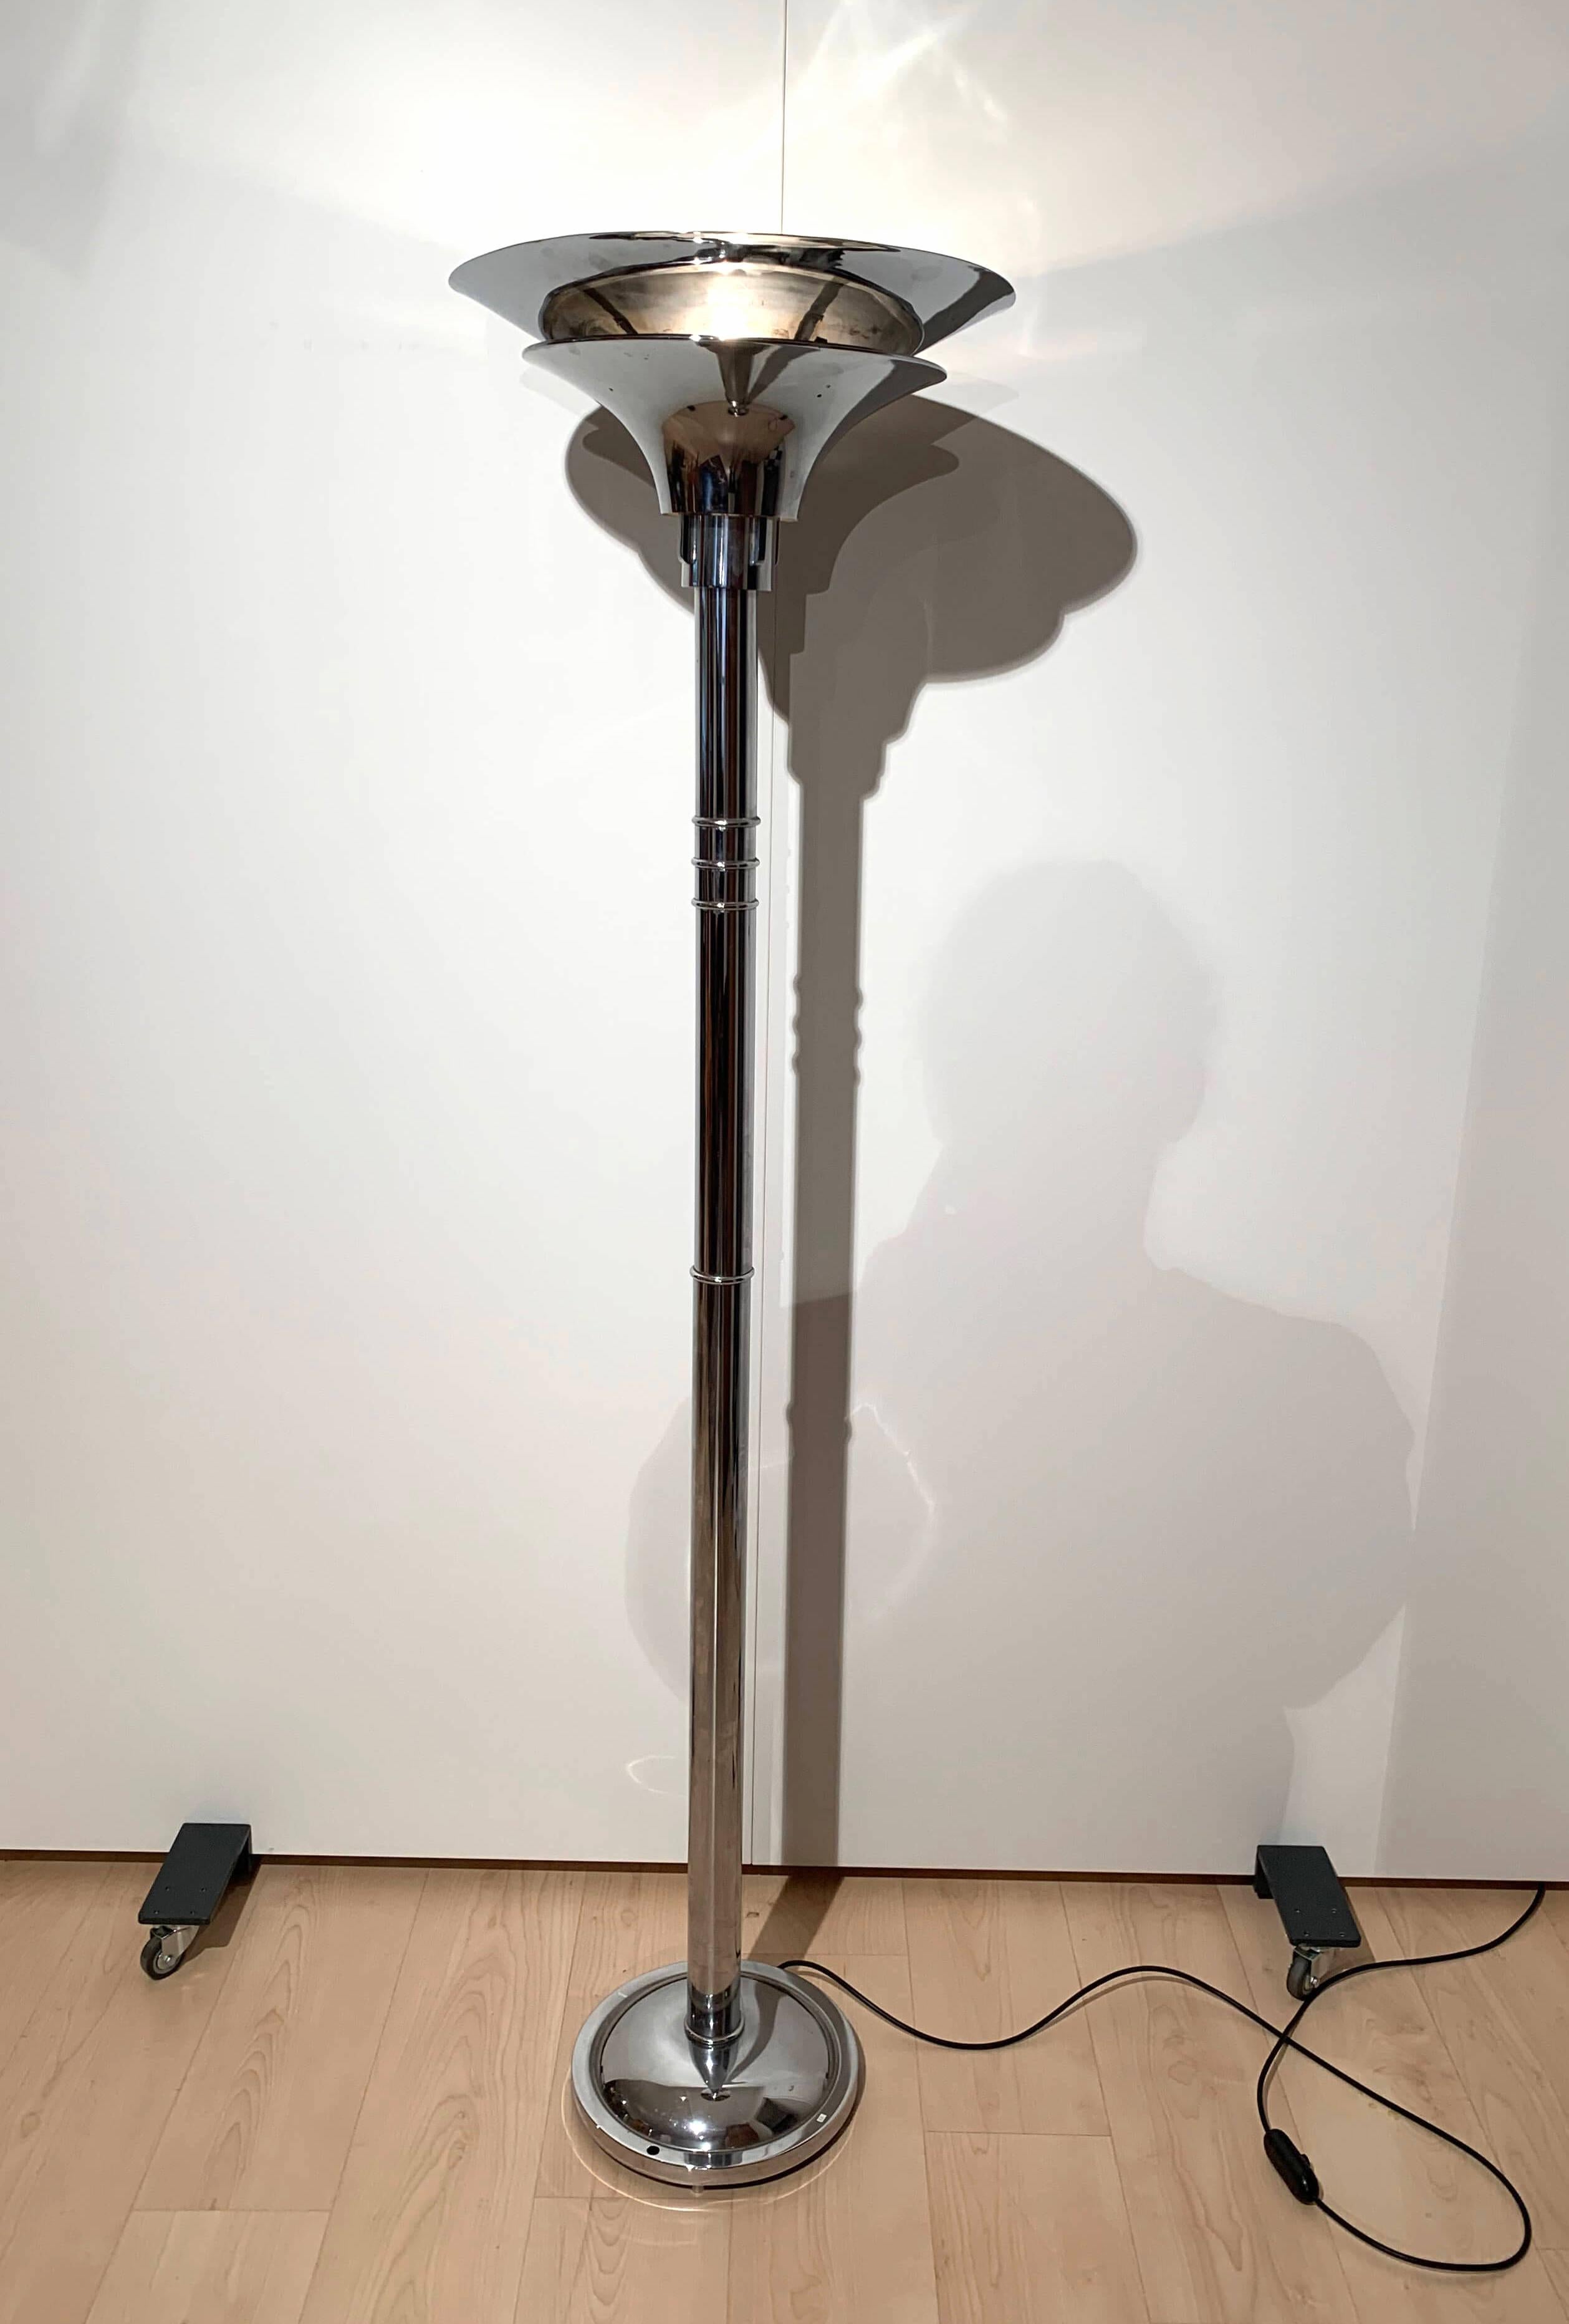 Original Art Deco floor lamp by Georges Halais from France around 1930.
Chromed metal and . One light source at the top. Some signs of wear, scratches, and dent in the top shade. Newly electrified, light working properly. 
Measurements: 
H 175